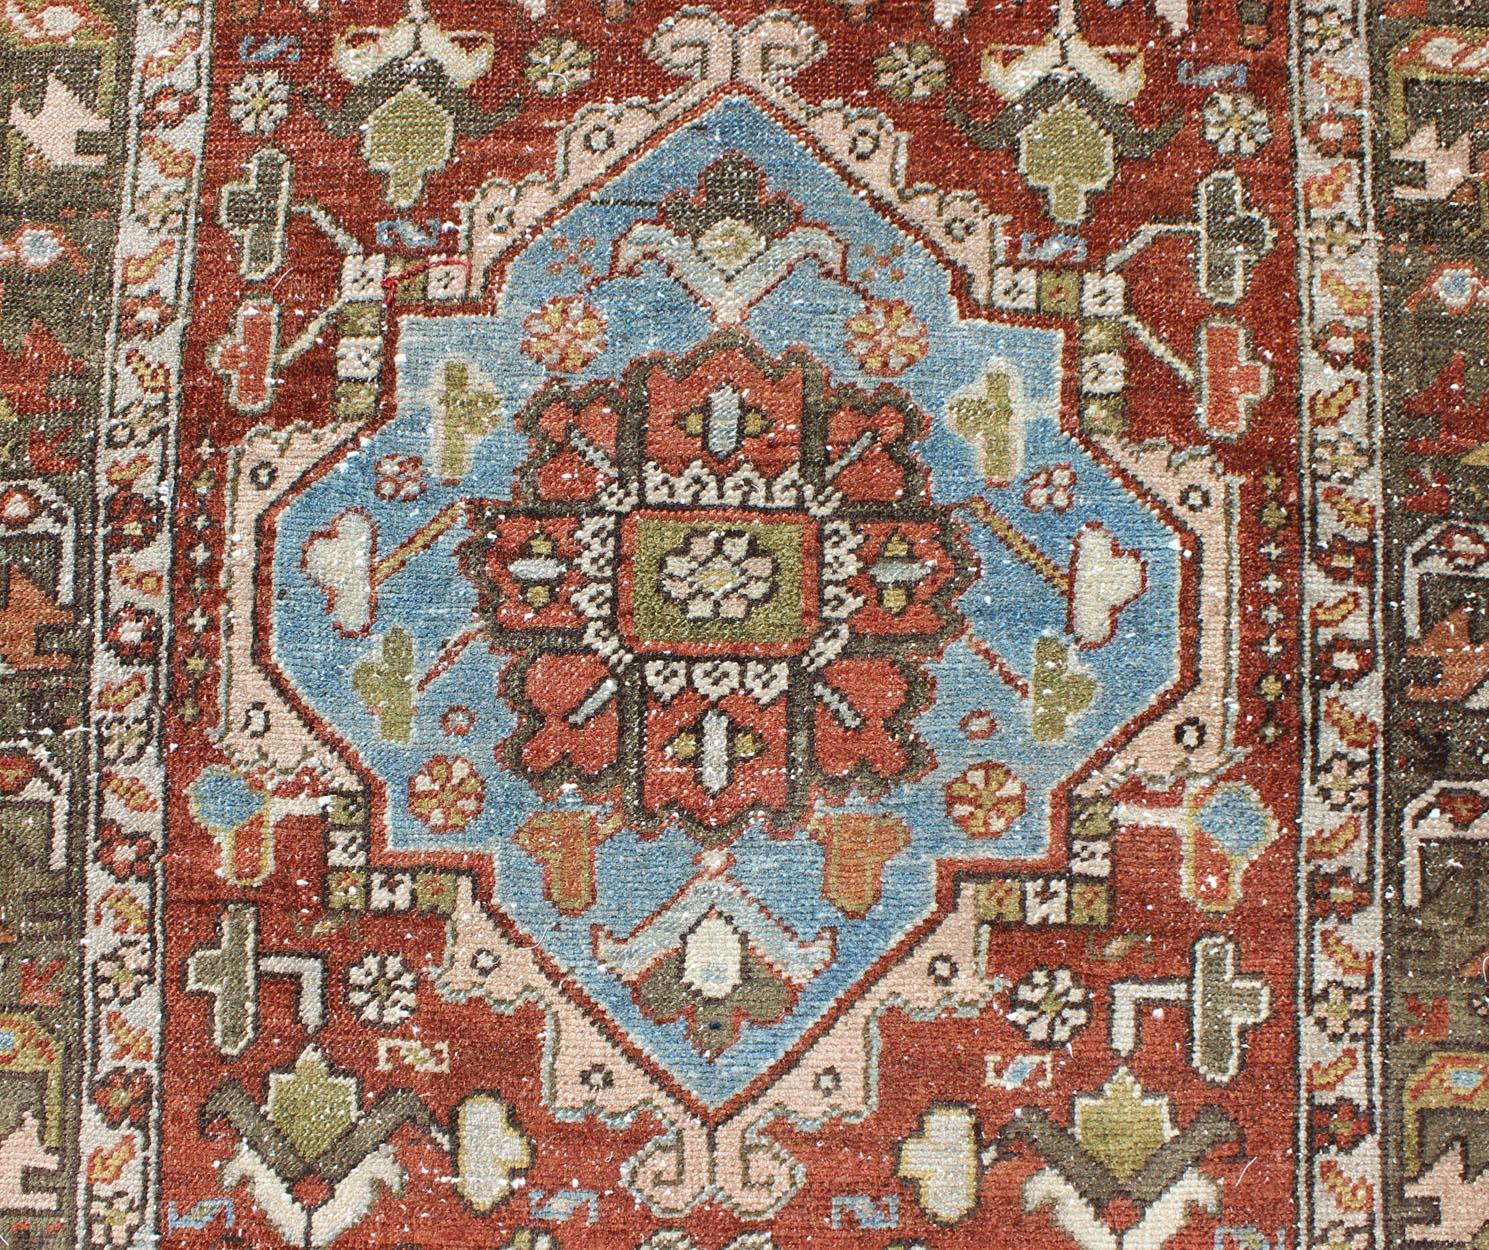 Antique Persian Heriz Runner with Geometric Medallion Design in Red, Olive, Blue In Excellent Condition For Sale In Atlanta, GA